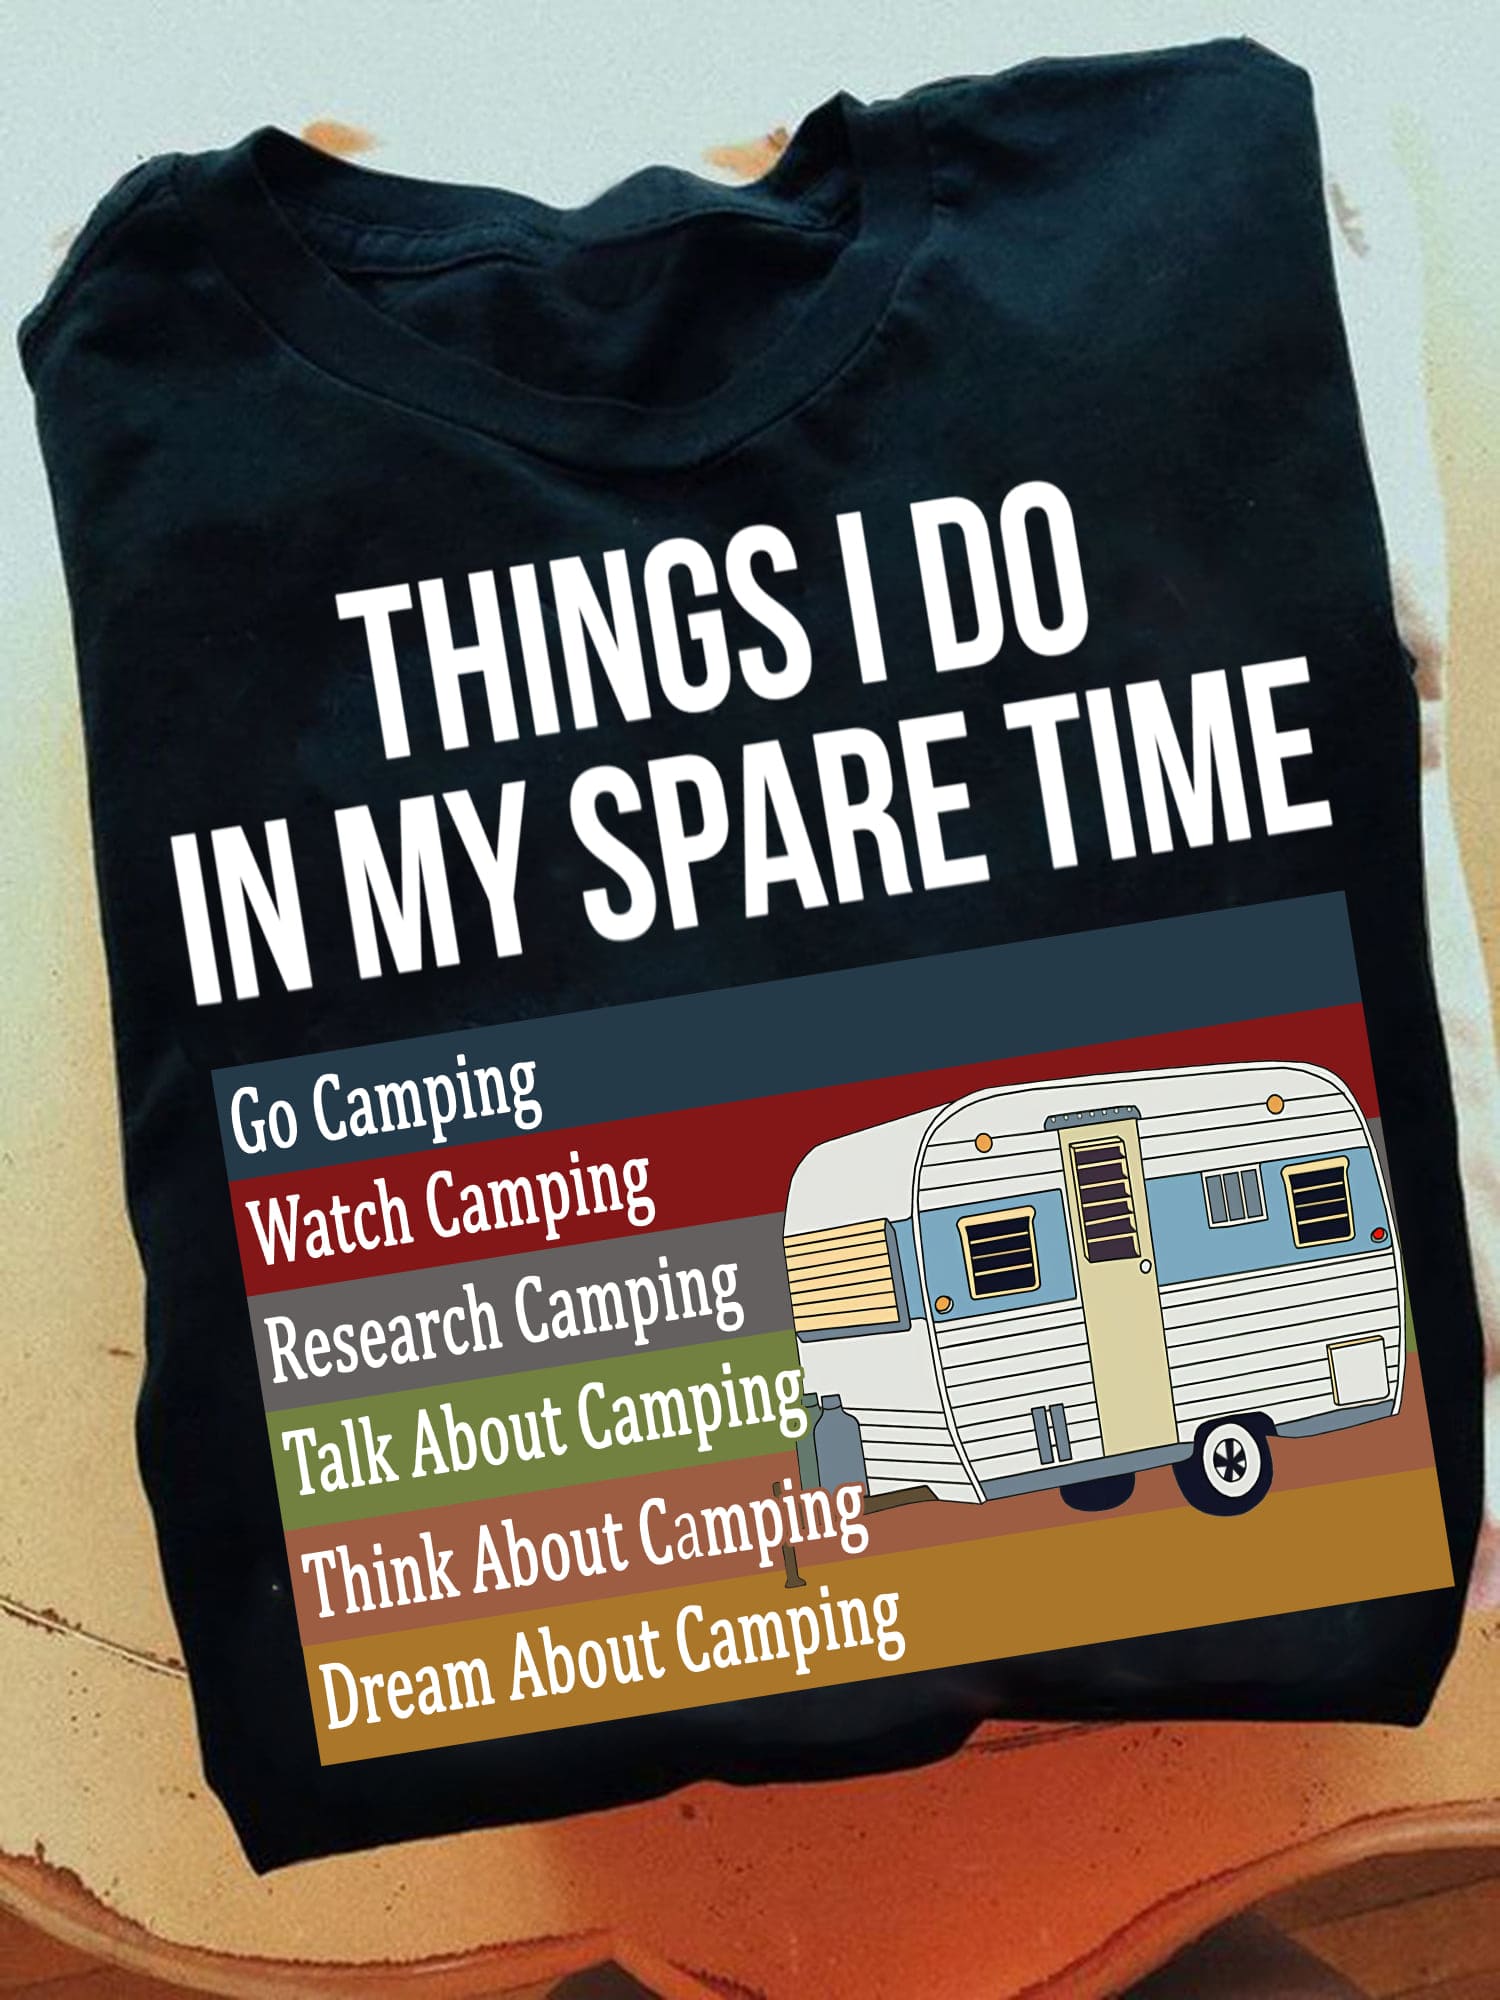 Things I do in my spare time - Go camping, watch camping, research camping, talk about camping, recreational vehicle